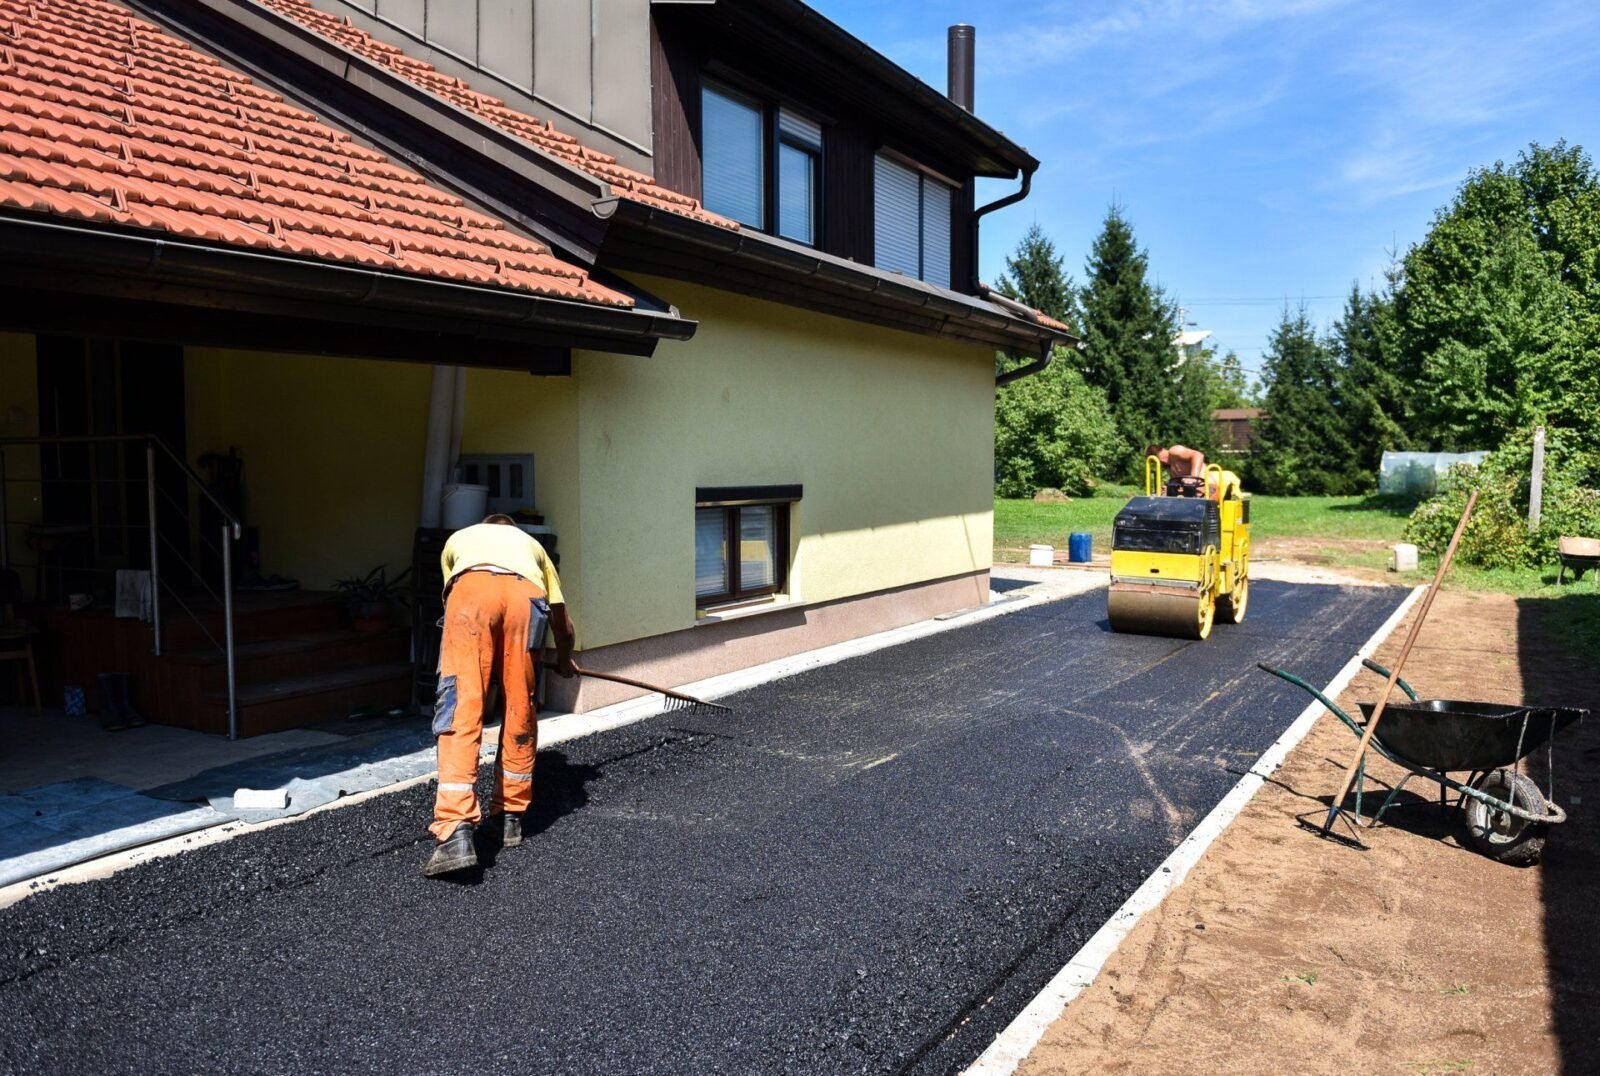 After expanding the driveway, a blacktop layer is applied.